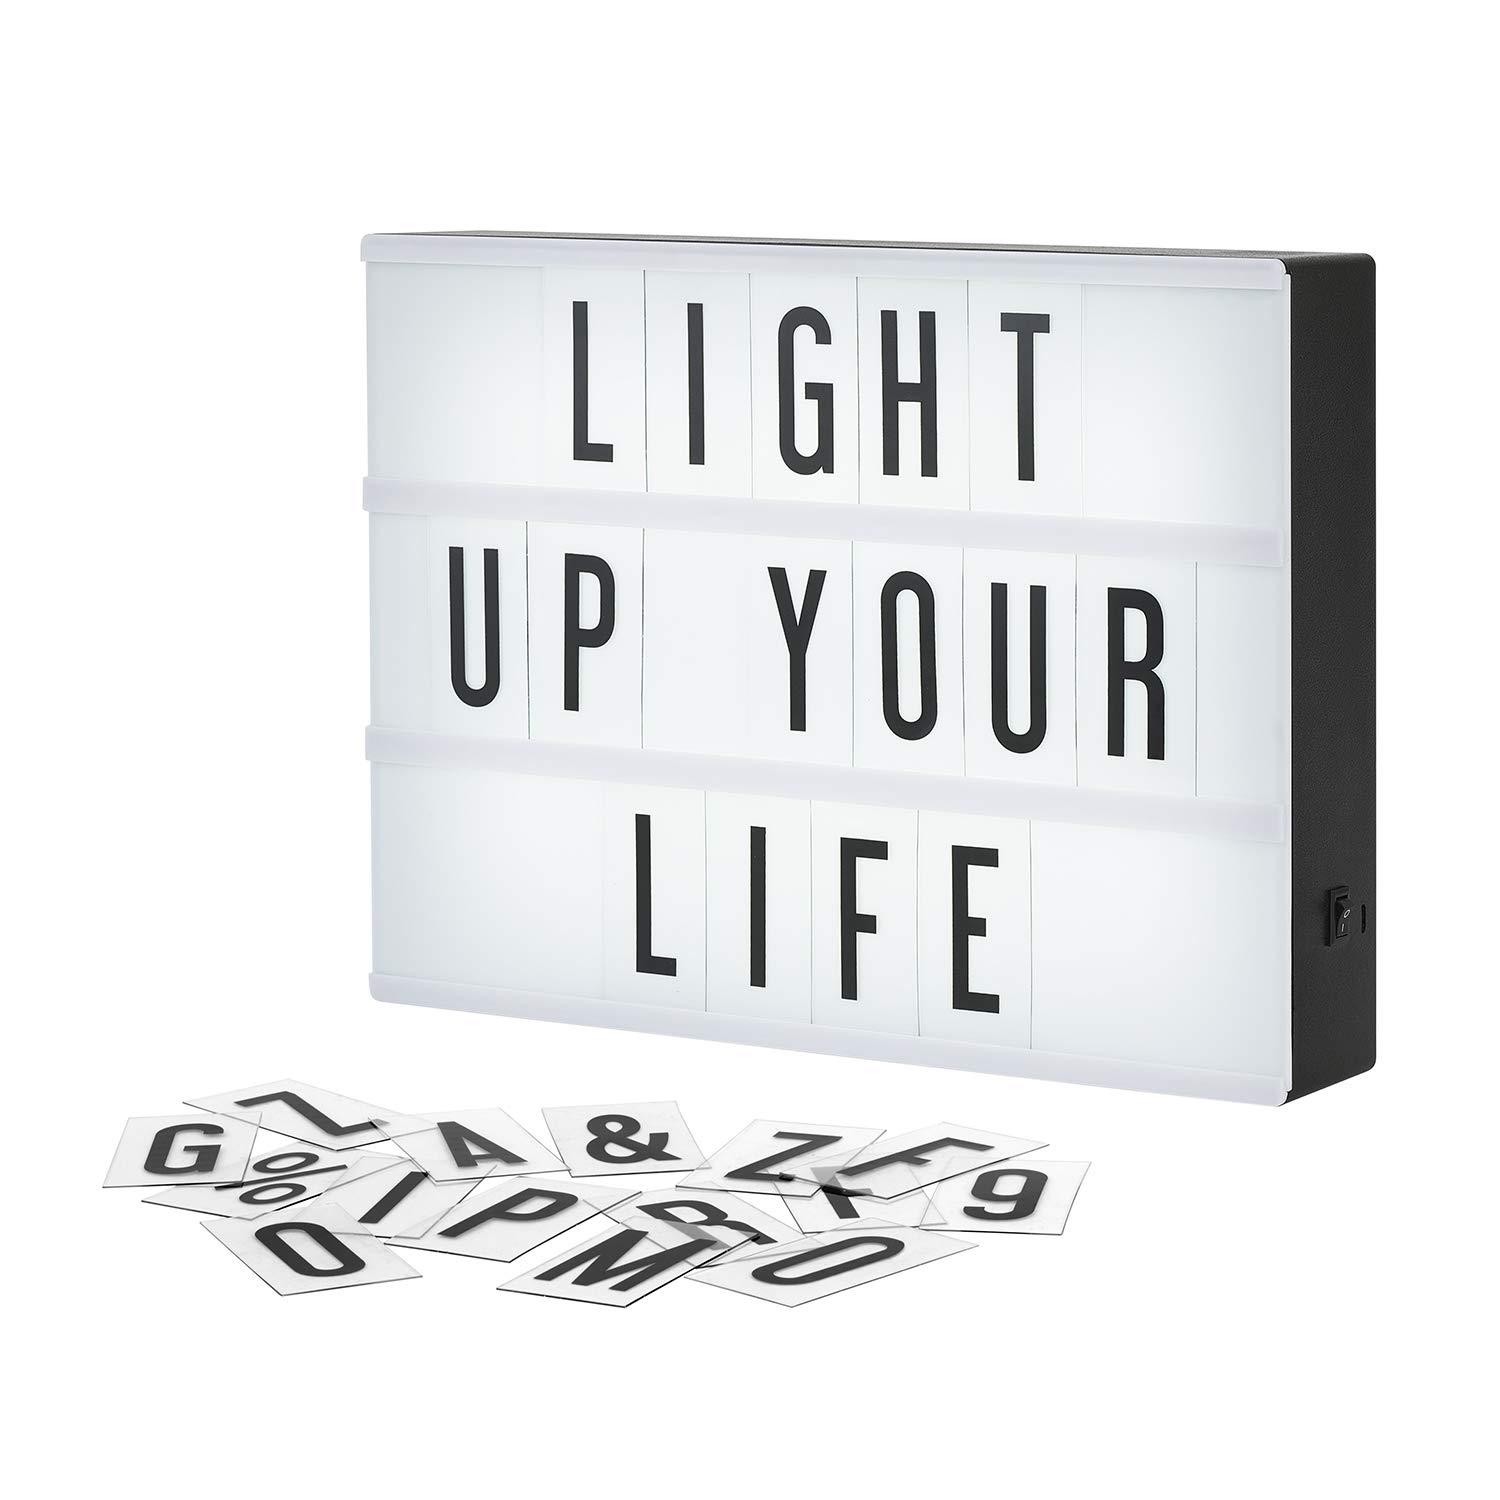 My Cinema Lightbox The Original LED Marquee Light Box with 100 Letters &  Numbers, USB and Built-in Storage, A4 Size 9x12, Black Shell, Cool White